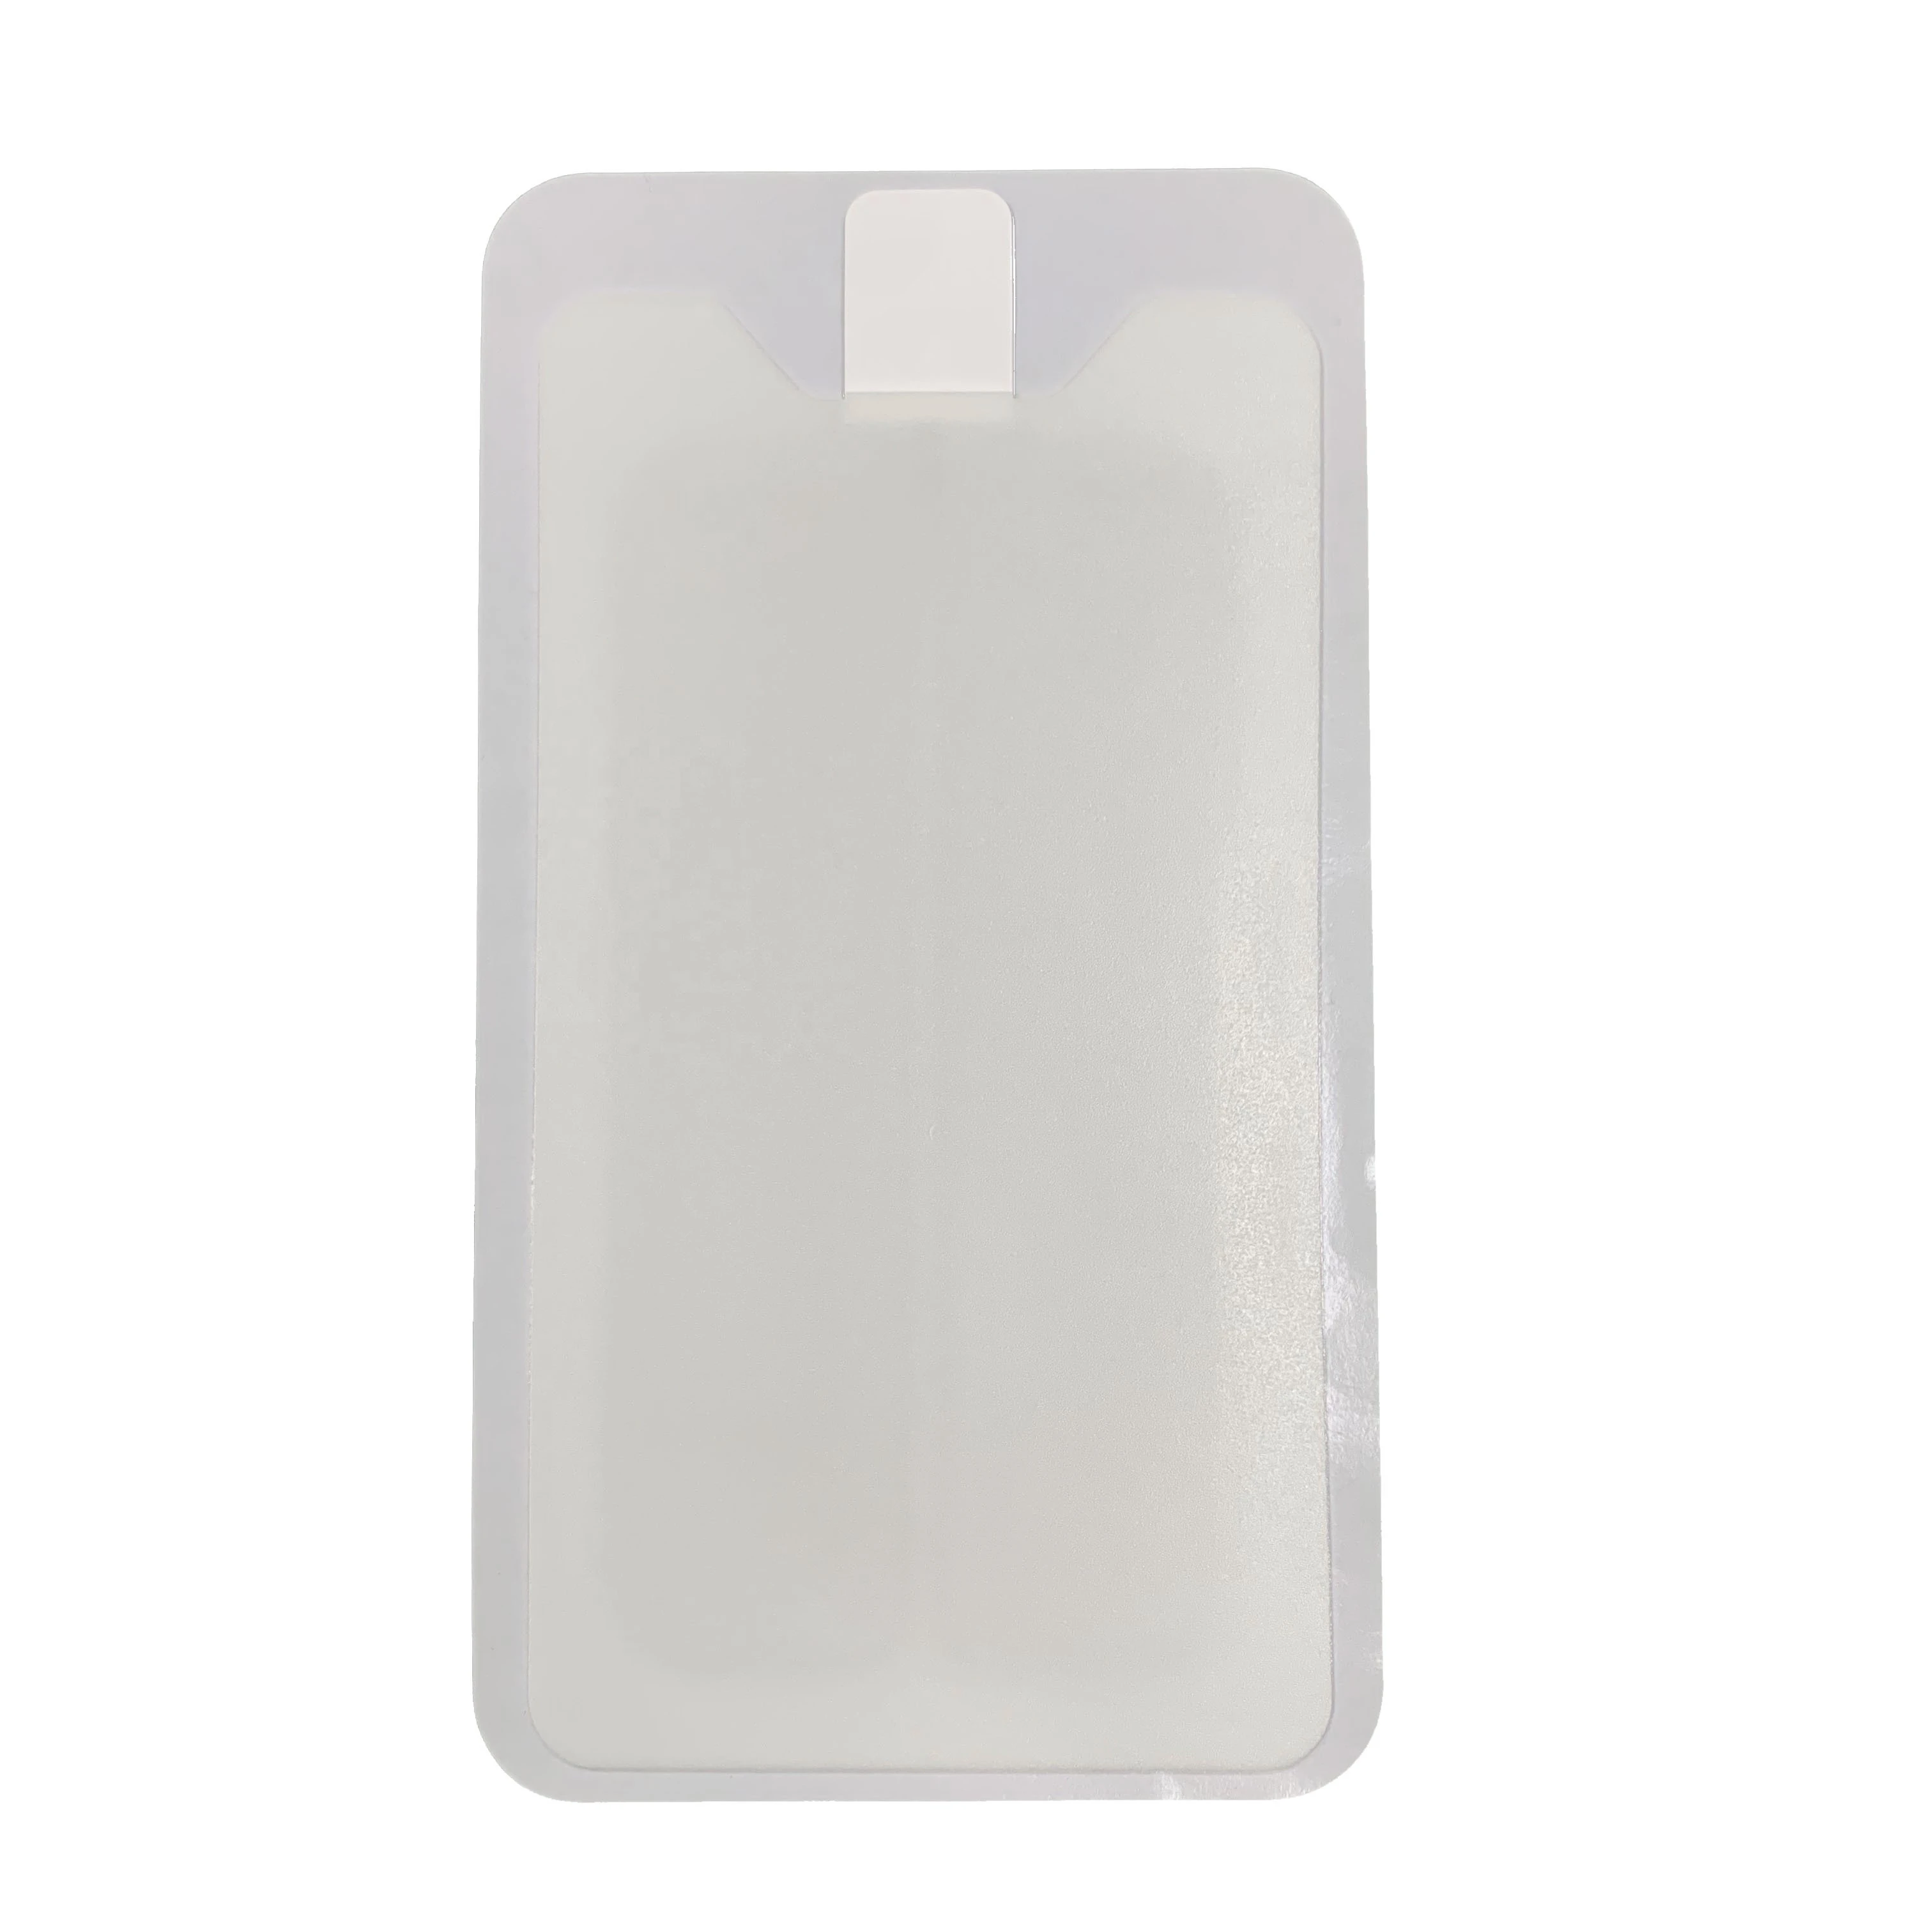 Hot Selling Neutral Negative Pad Disposable Electrosurgical Esu Grounding Pad